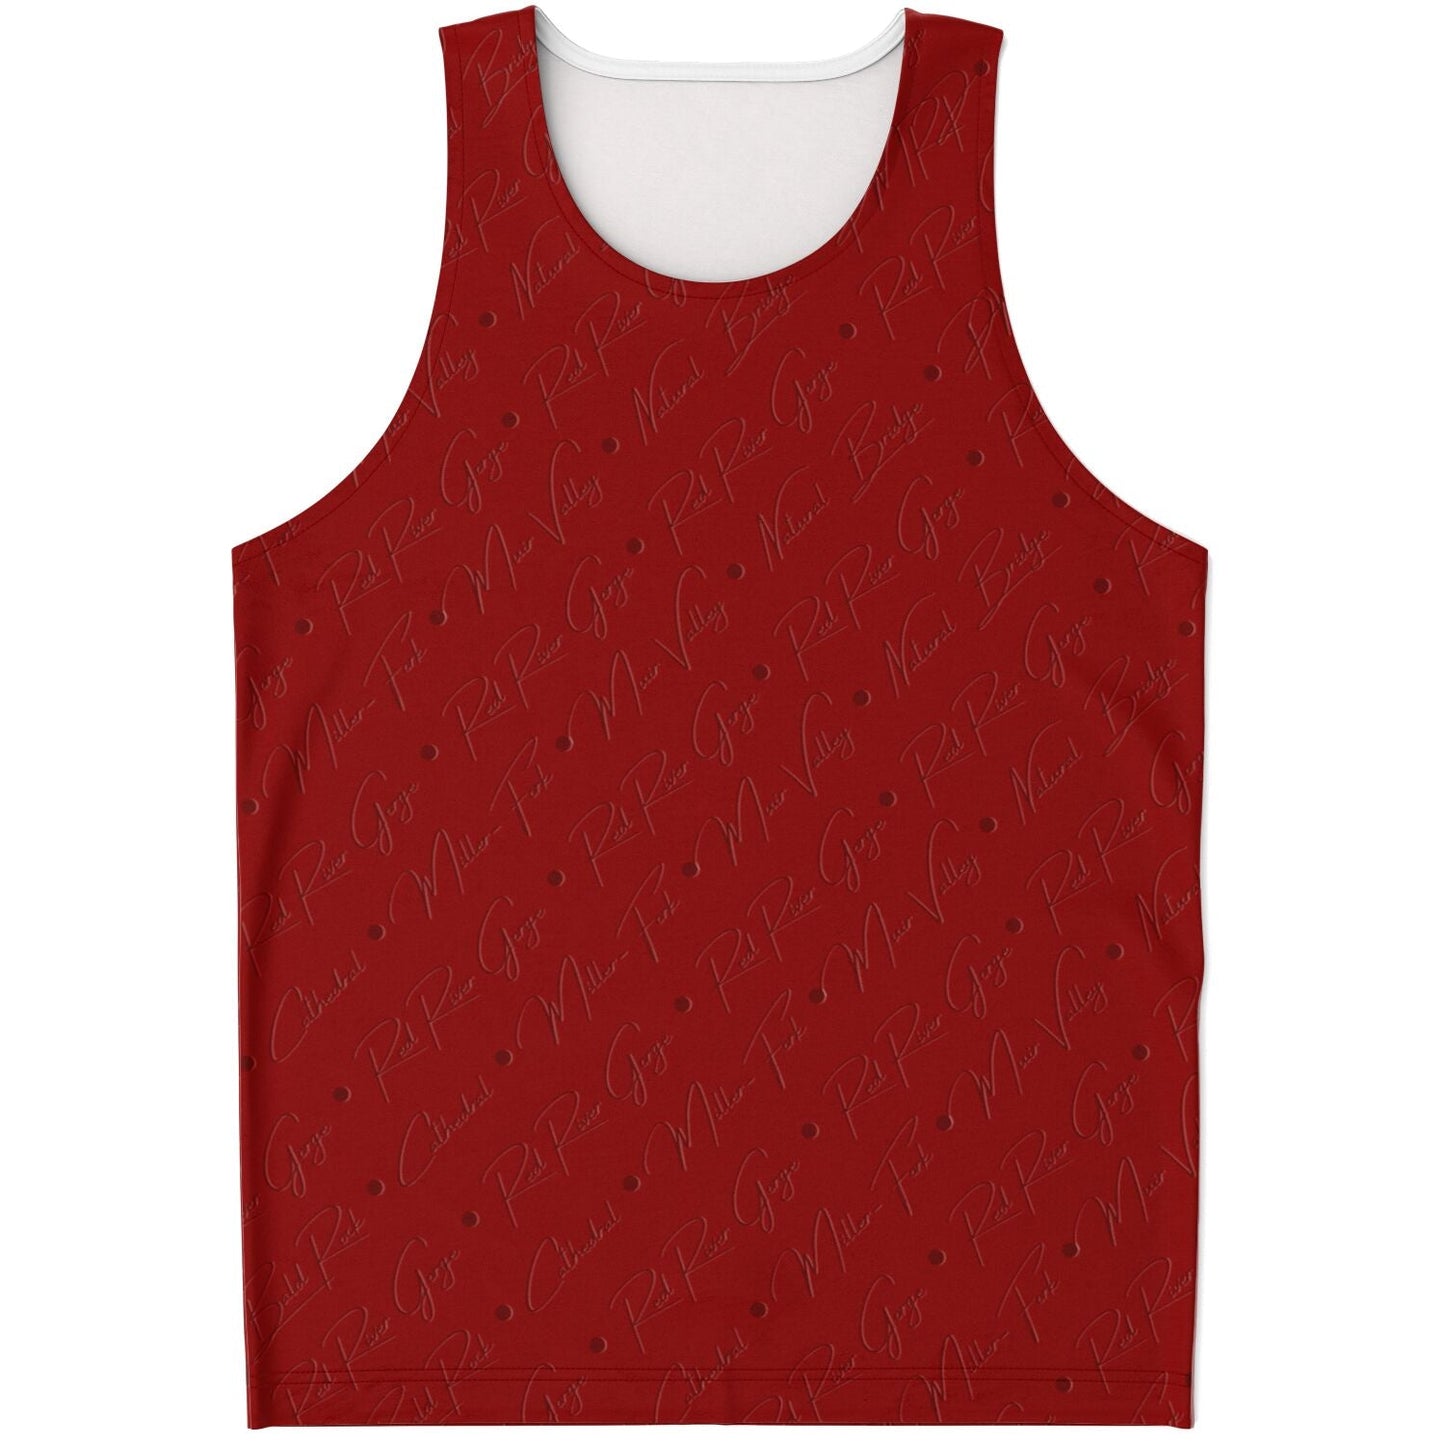 Tank Tops (Red River Gorge)